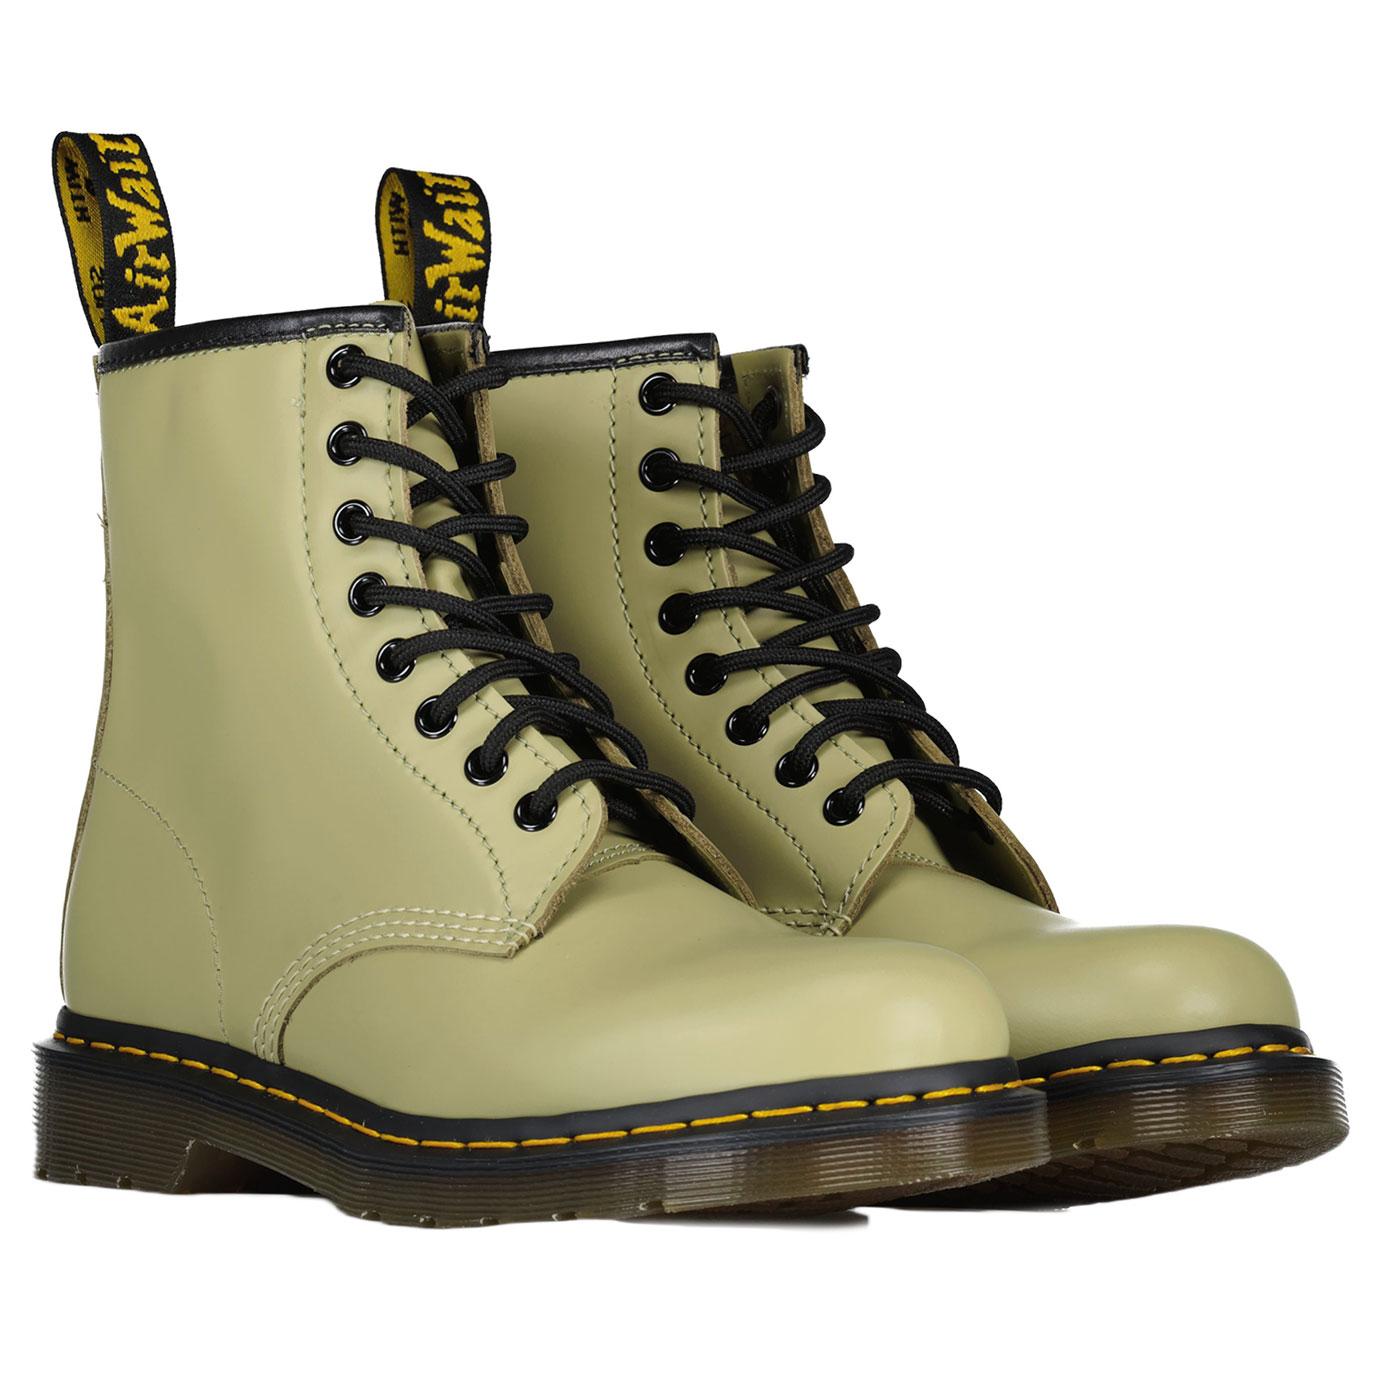 Dr Martens 1460 Smooth Leather Retro Mod Boots in Pale Olive